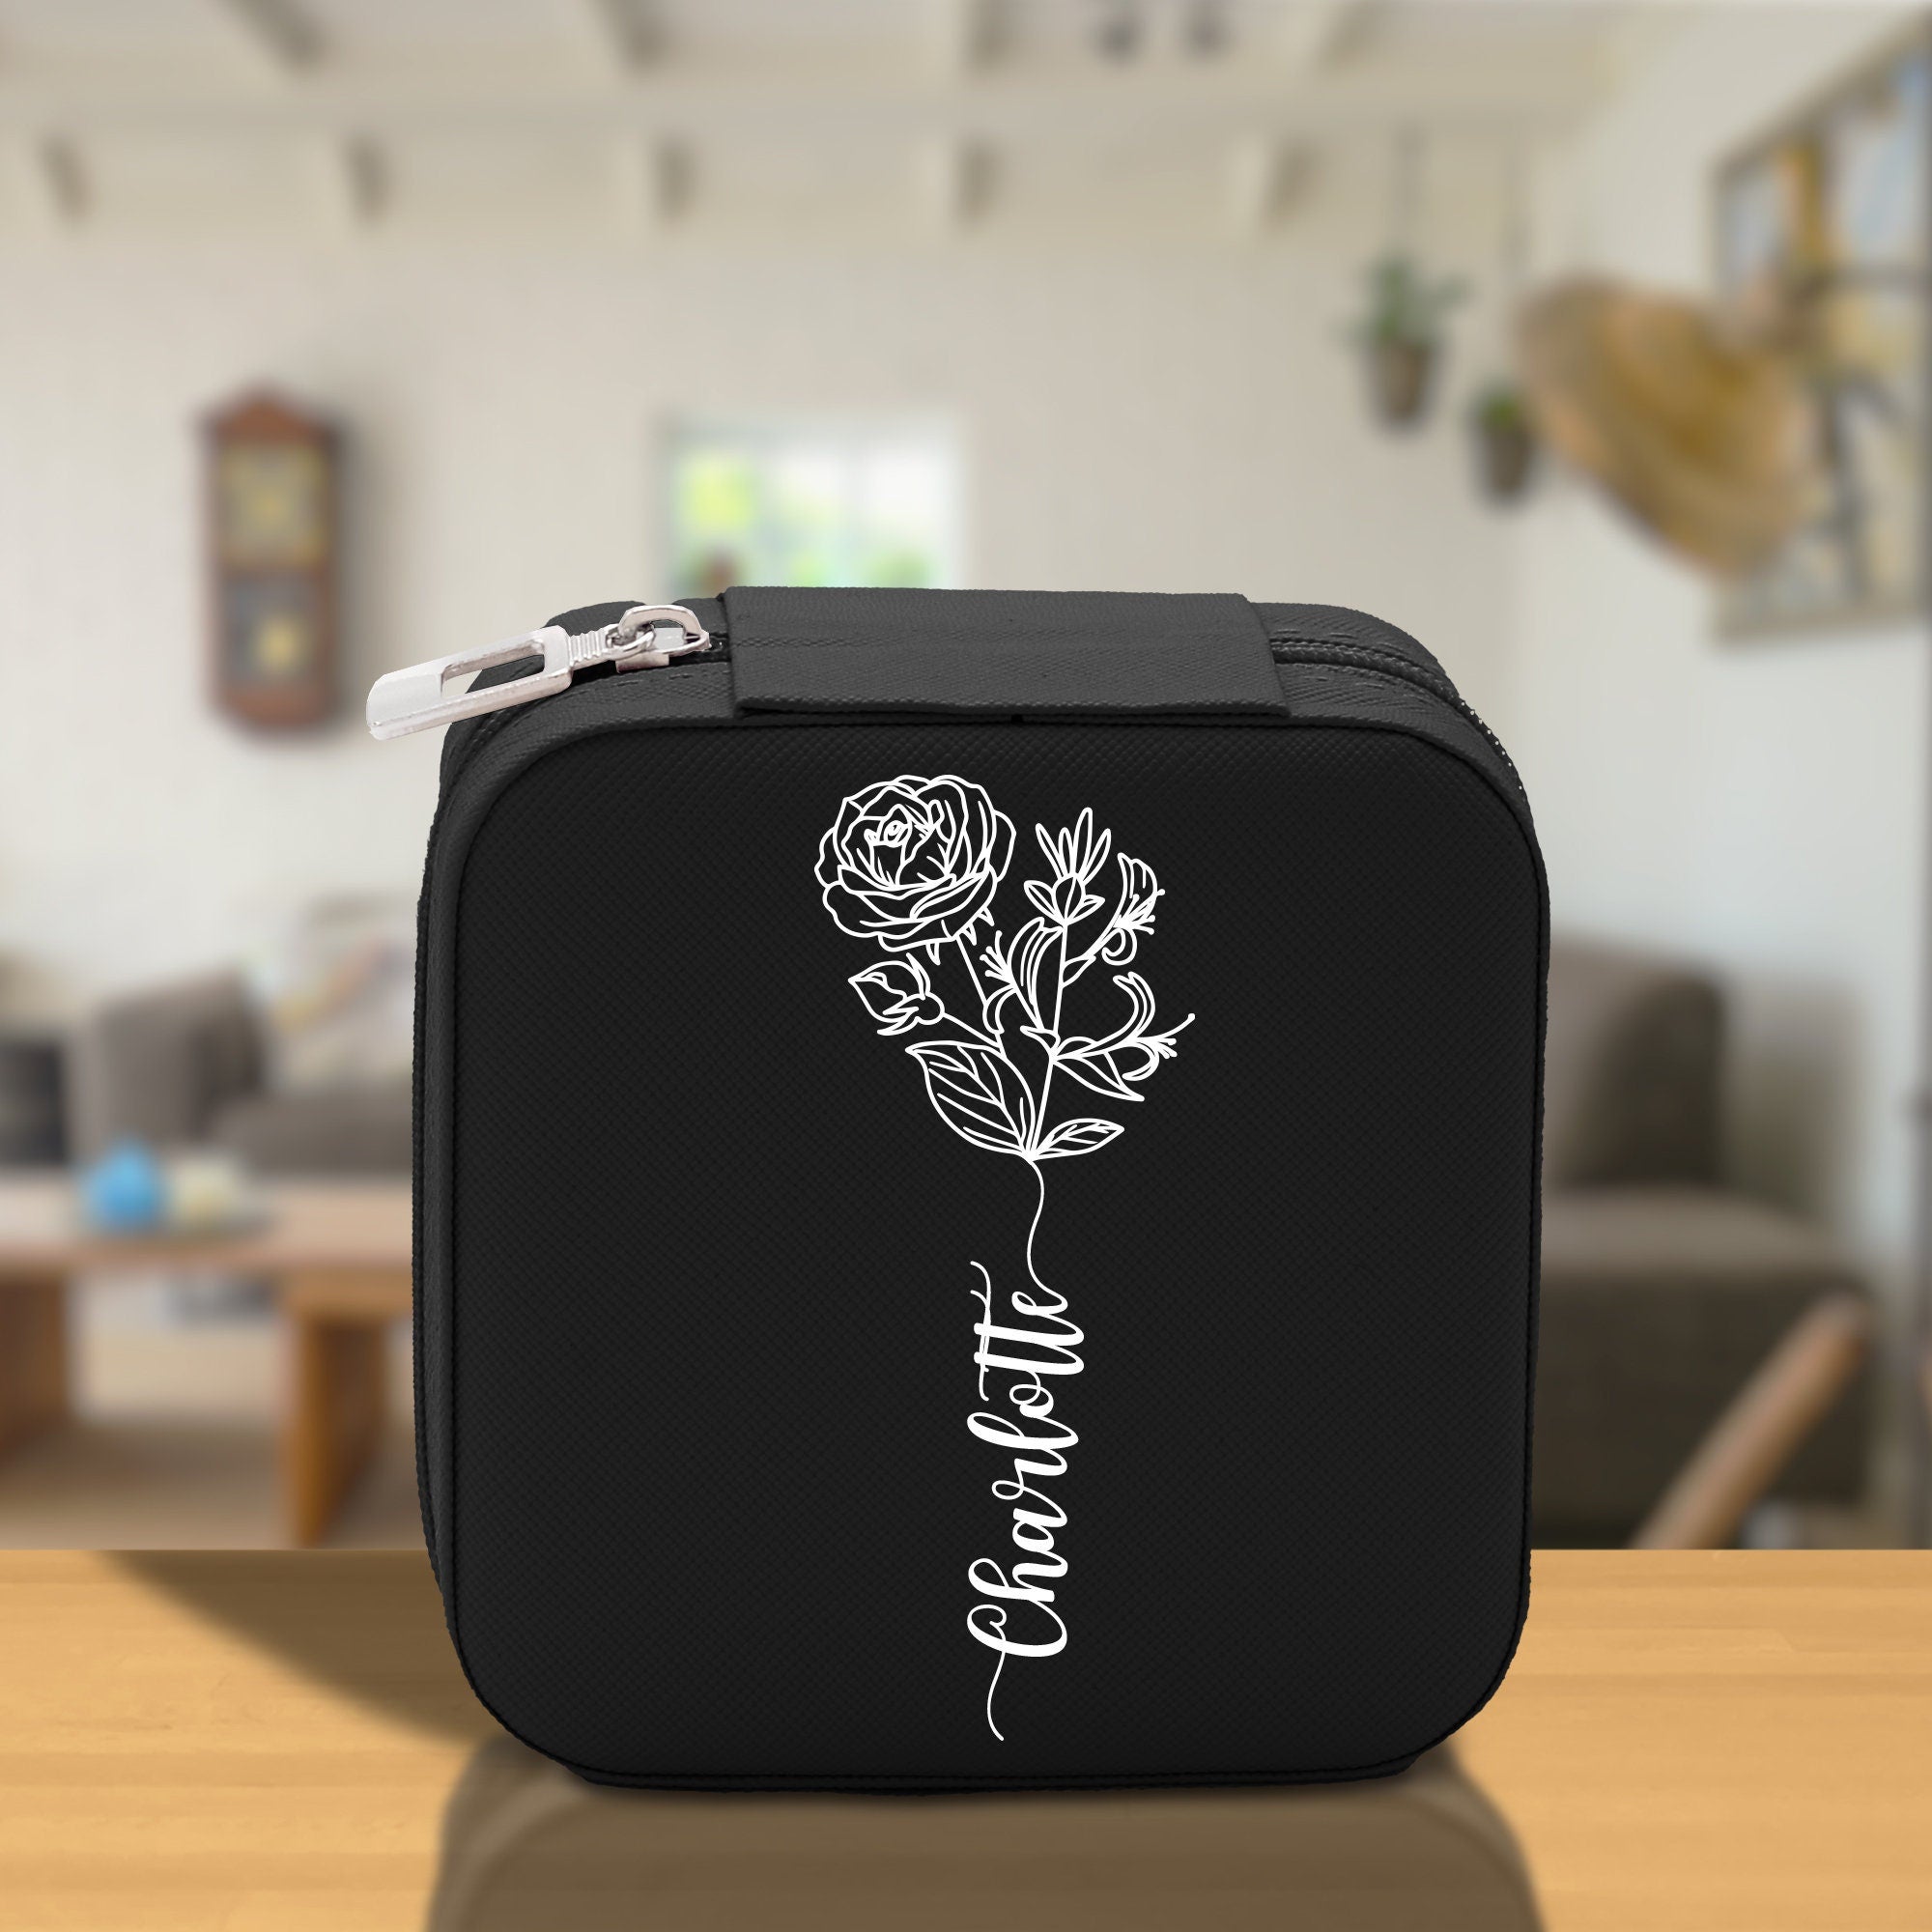 a black case with a white flower on it